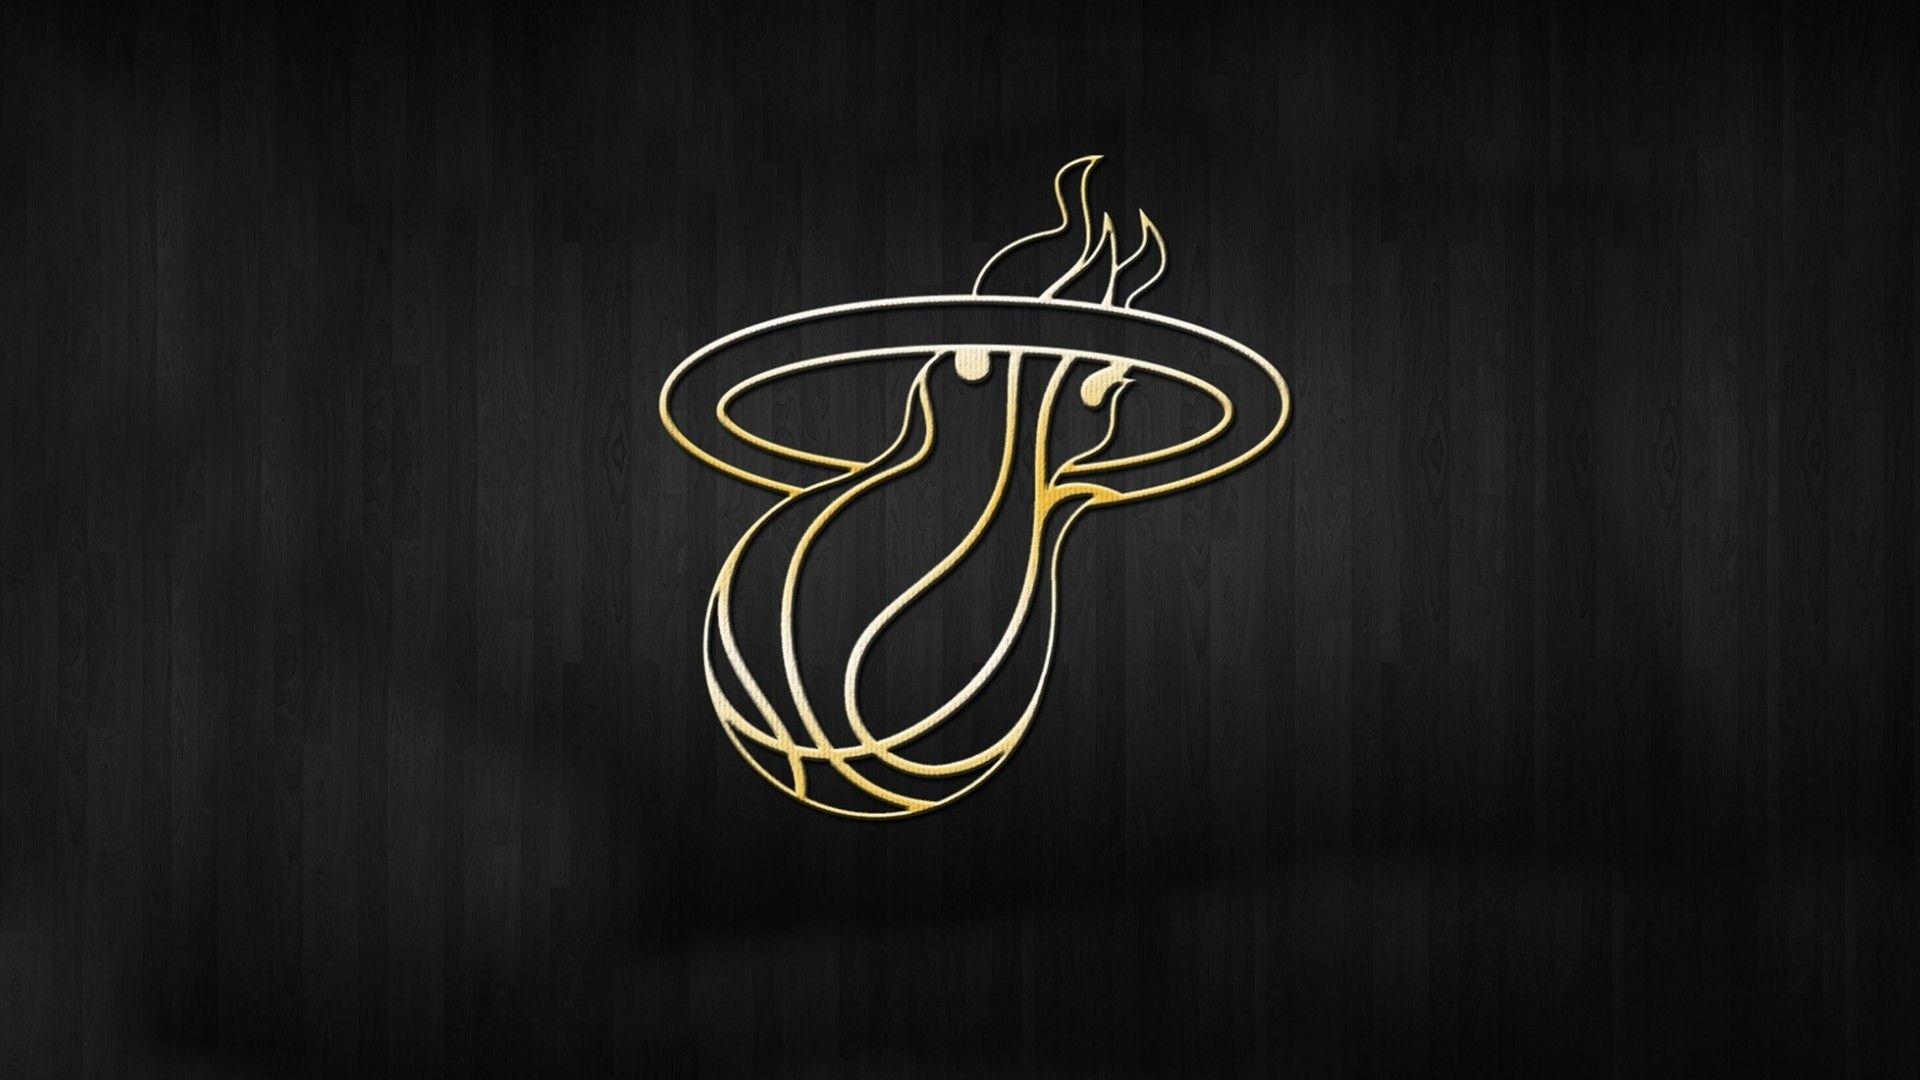 Gold Basketball Logo - Gold logo basketball team wallpapers and images - wallpapers ...